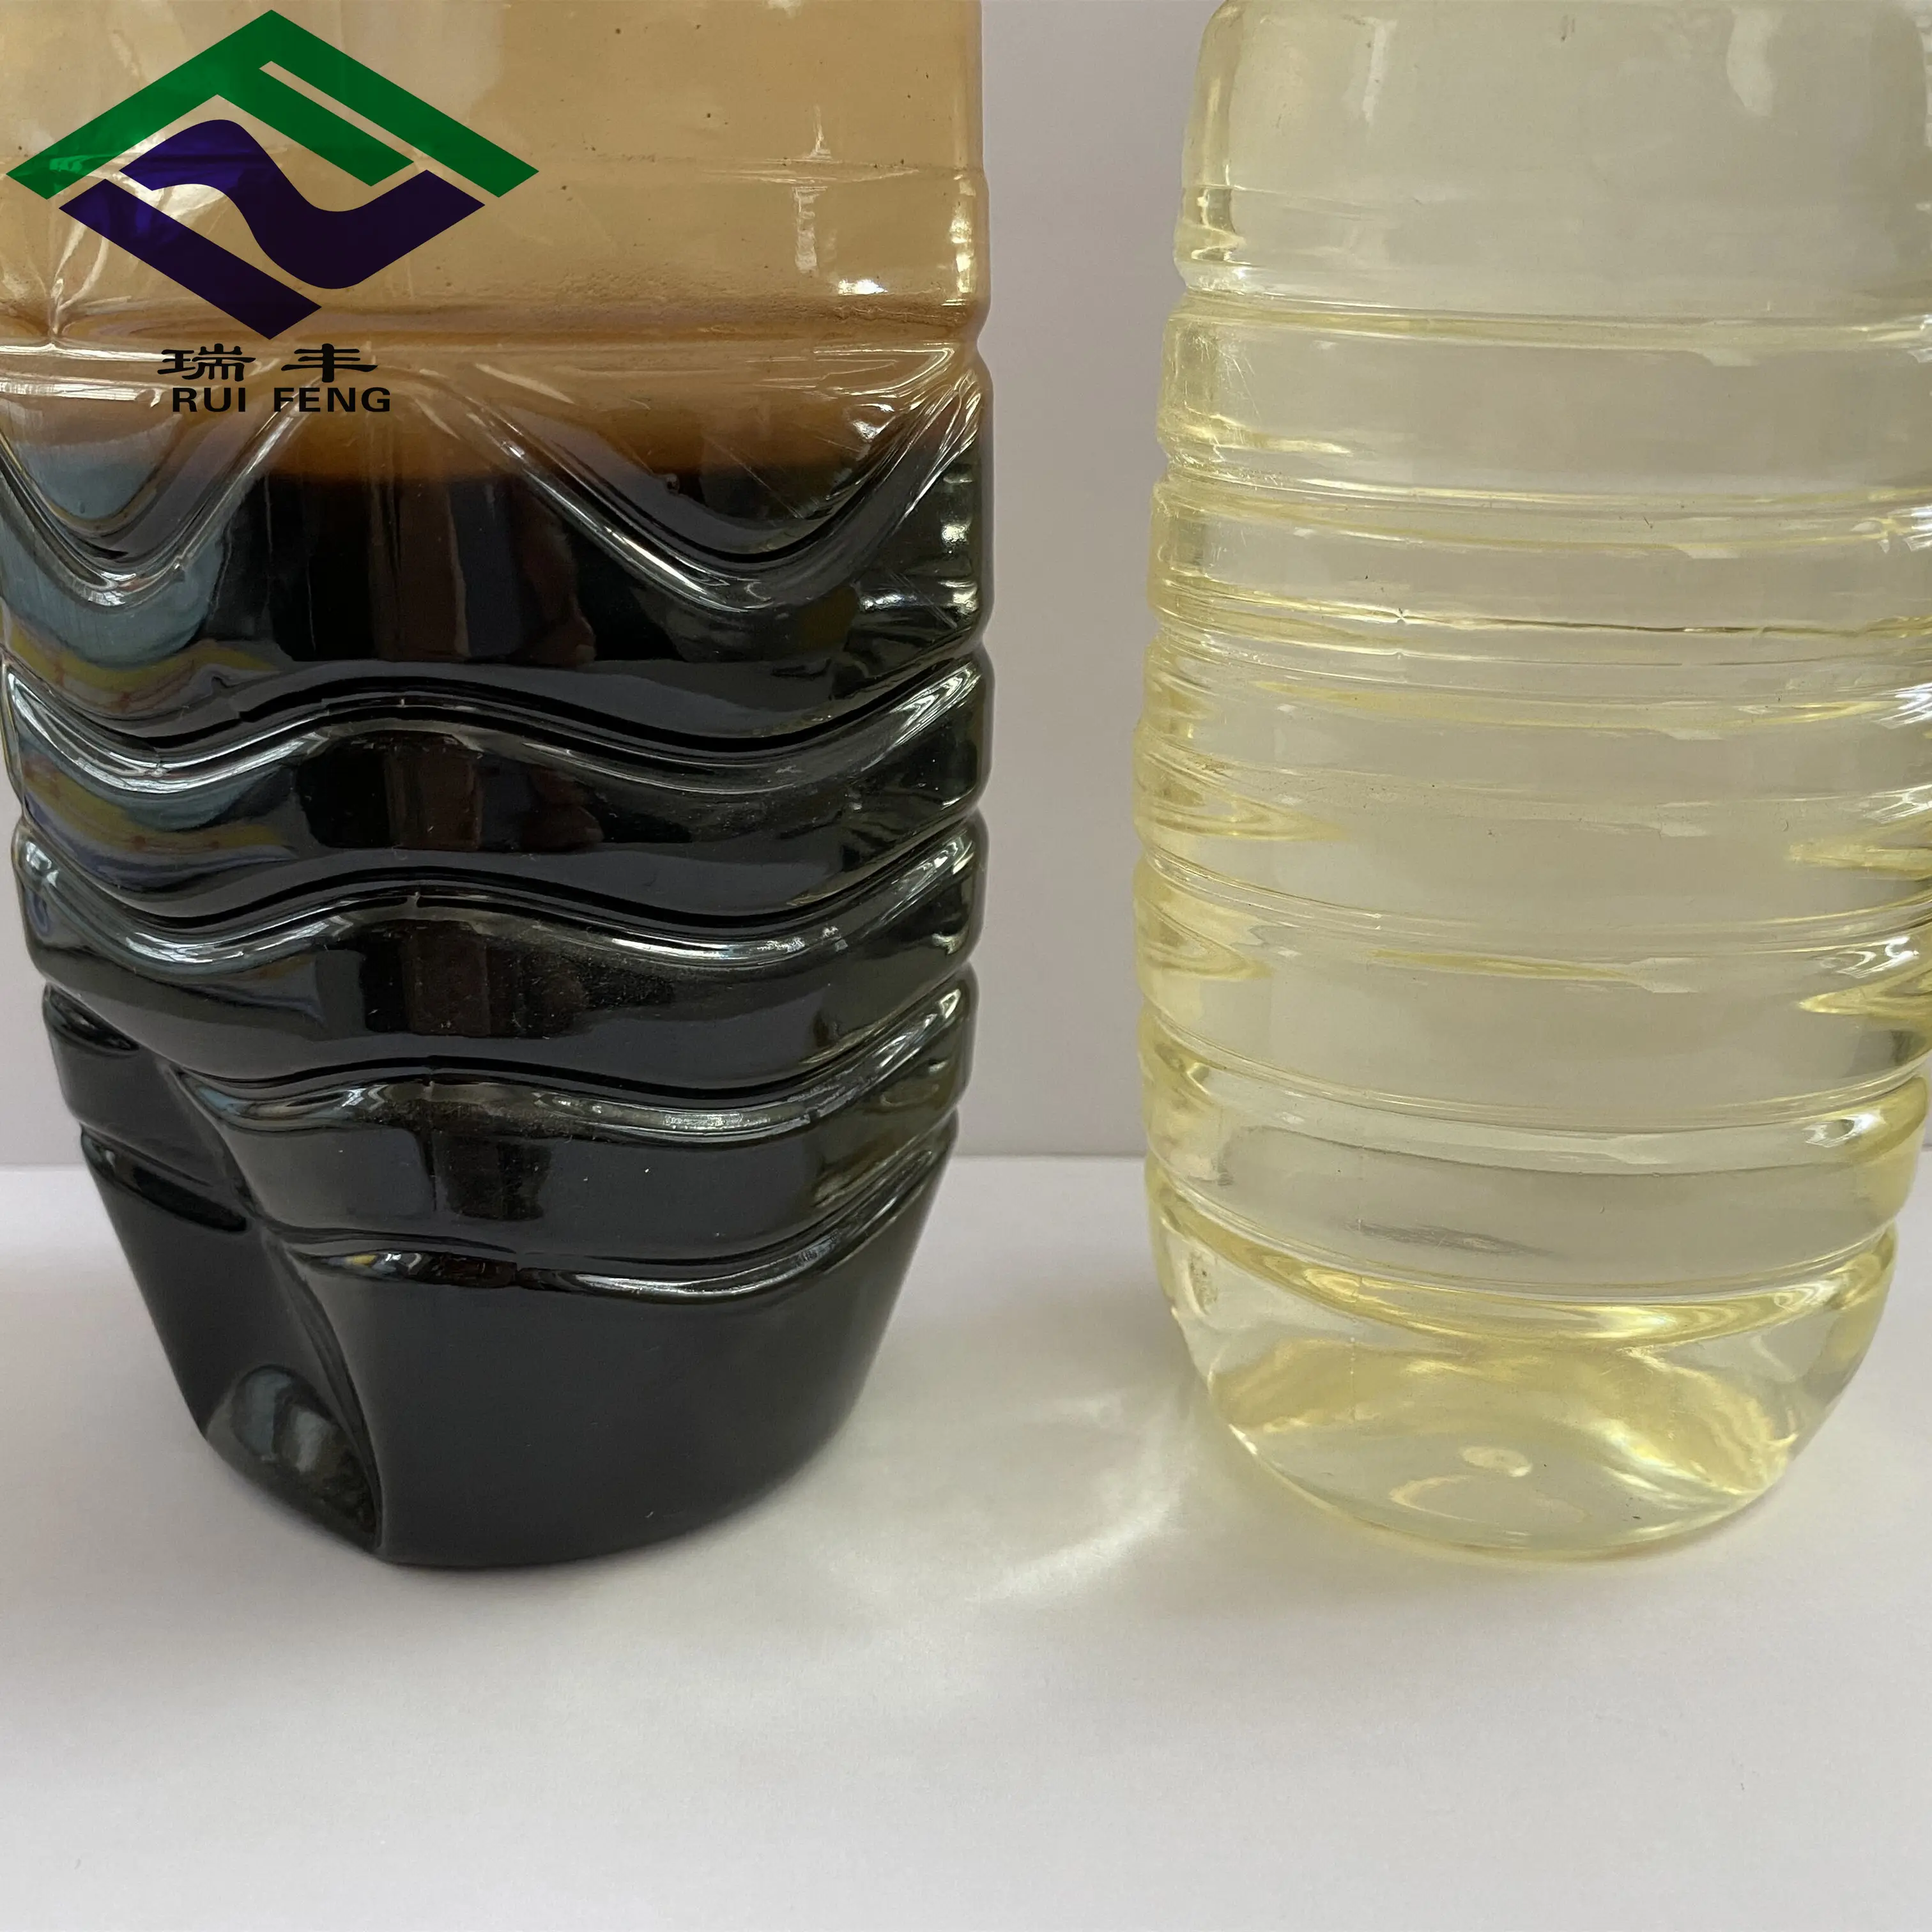 highly activated bleaching earth for black engine oil bleaching